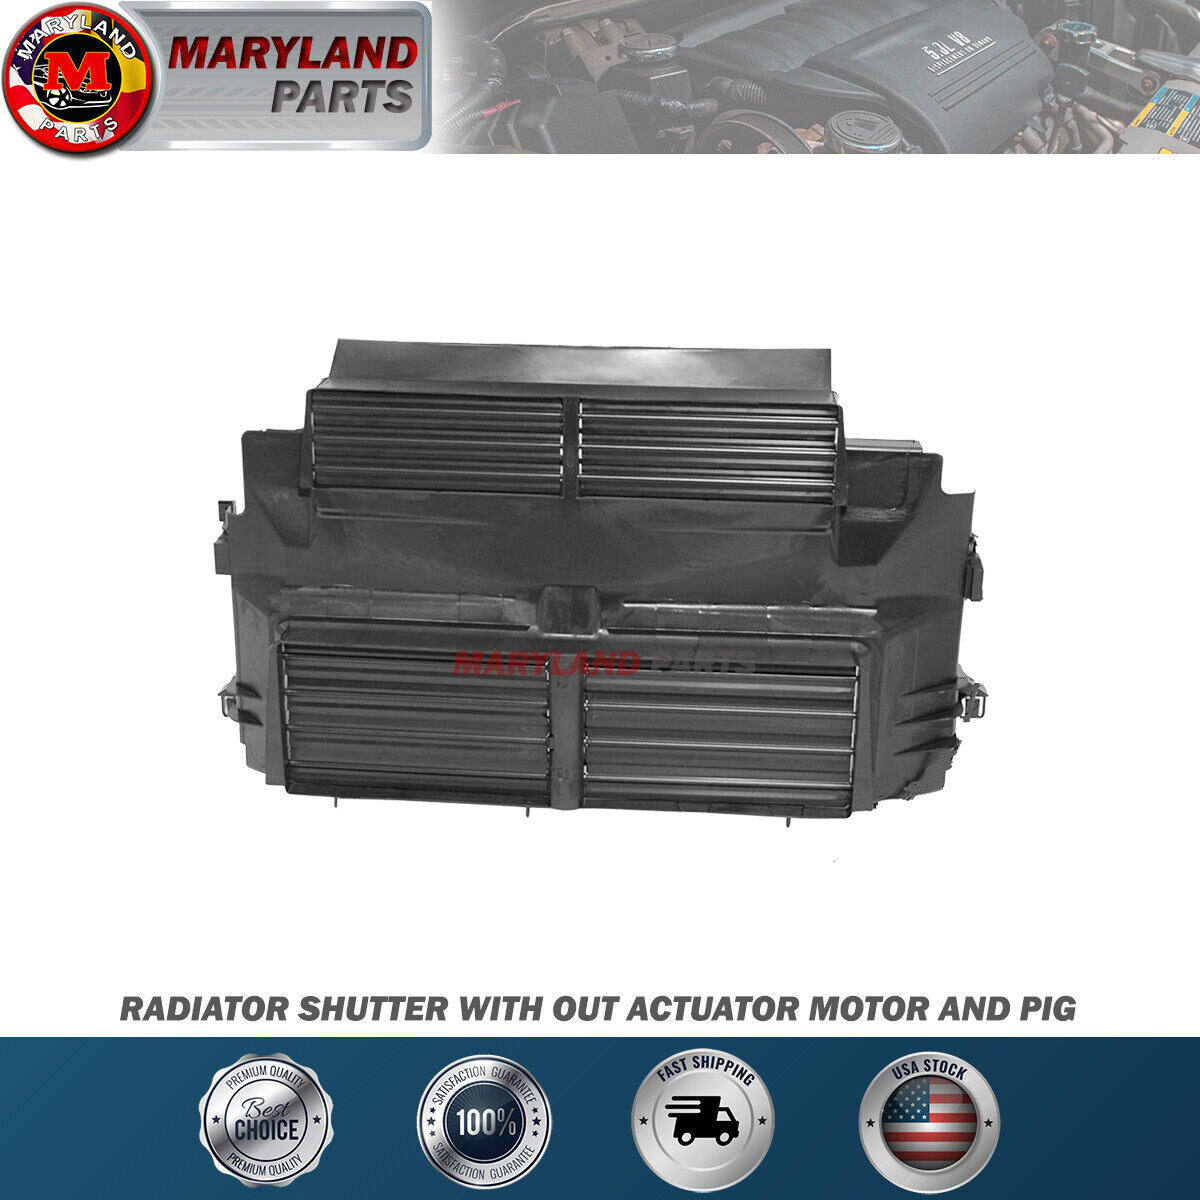 For 2012-2018 Ford Focus Radiator shutter with out actuator motor and pig